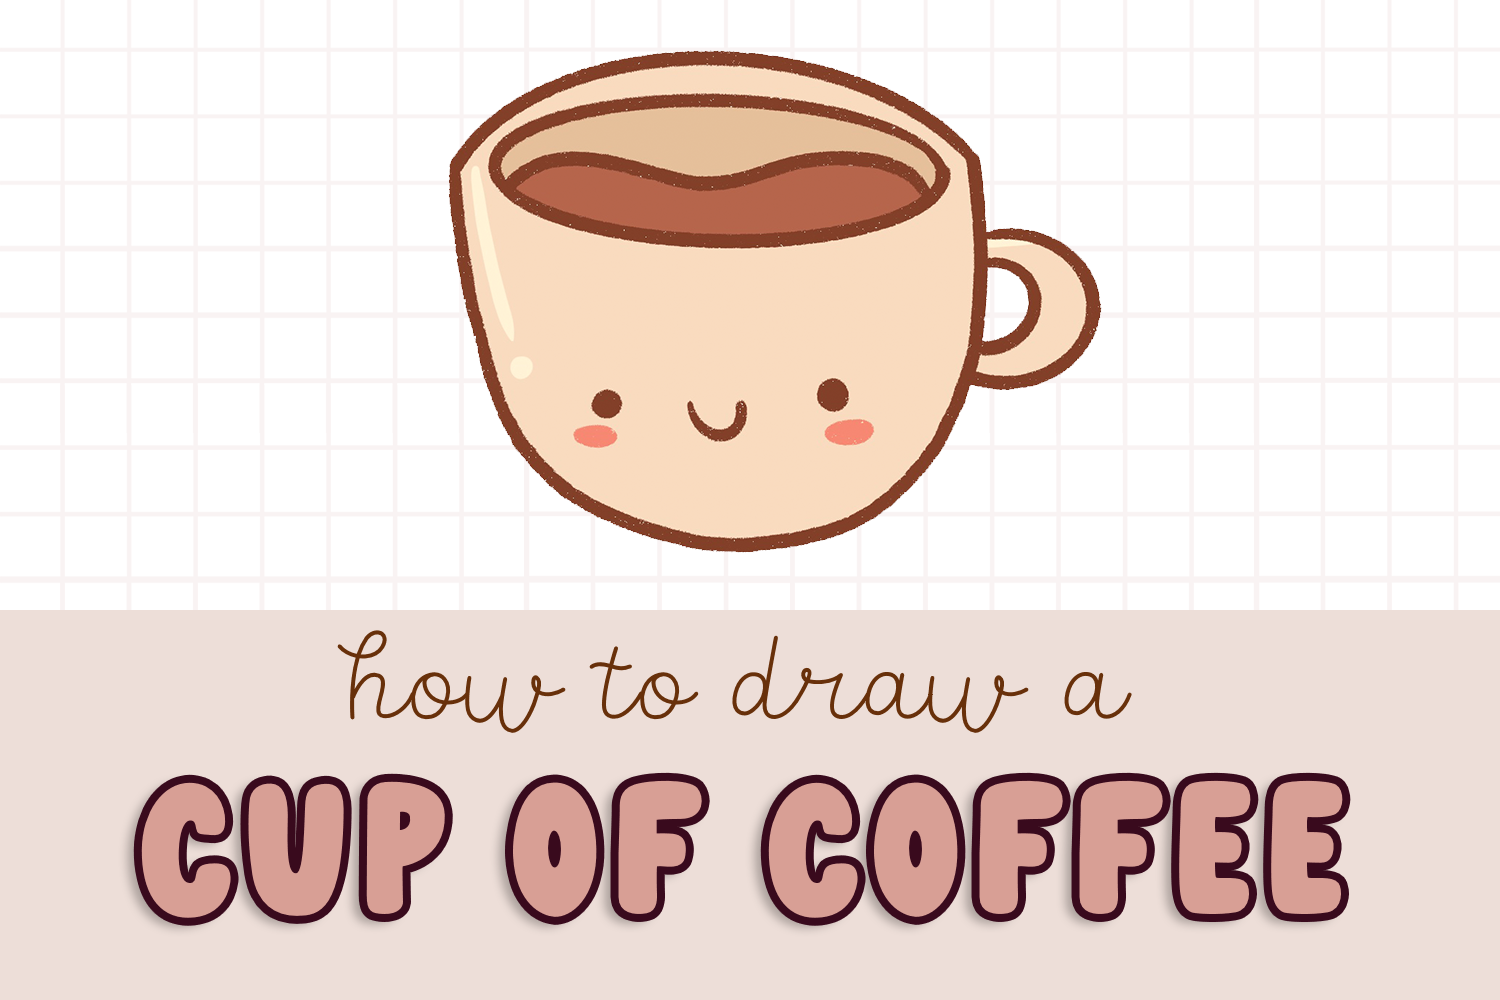 HOW TO DRAW A CUTE COFFEE CUP, STEP BY STEP 